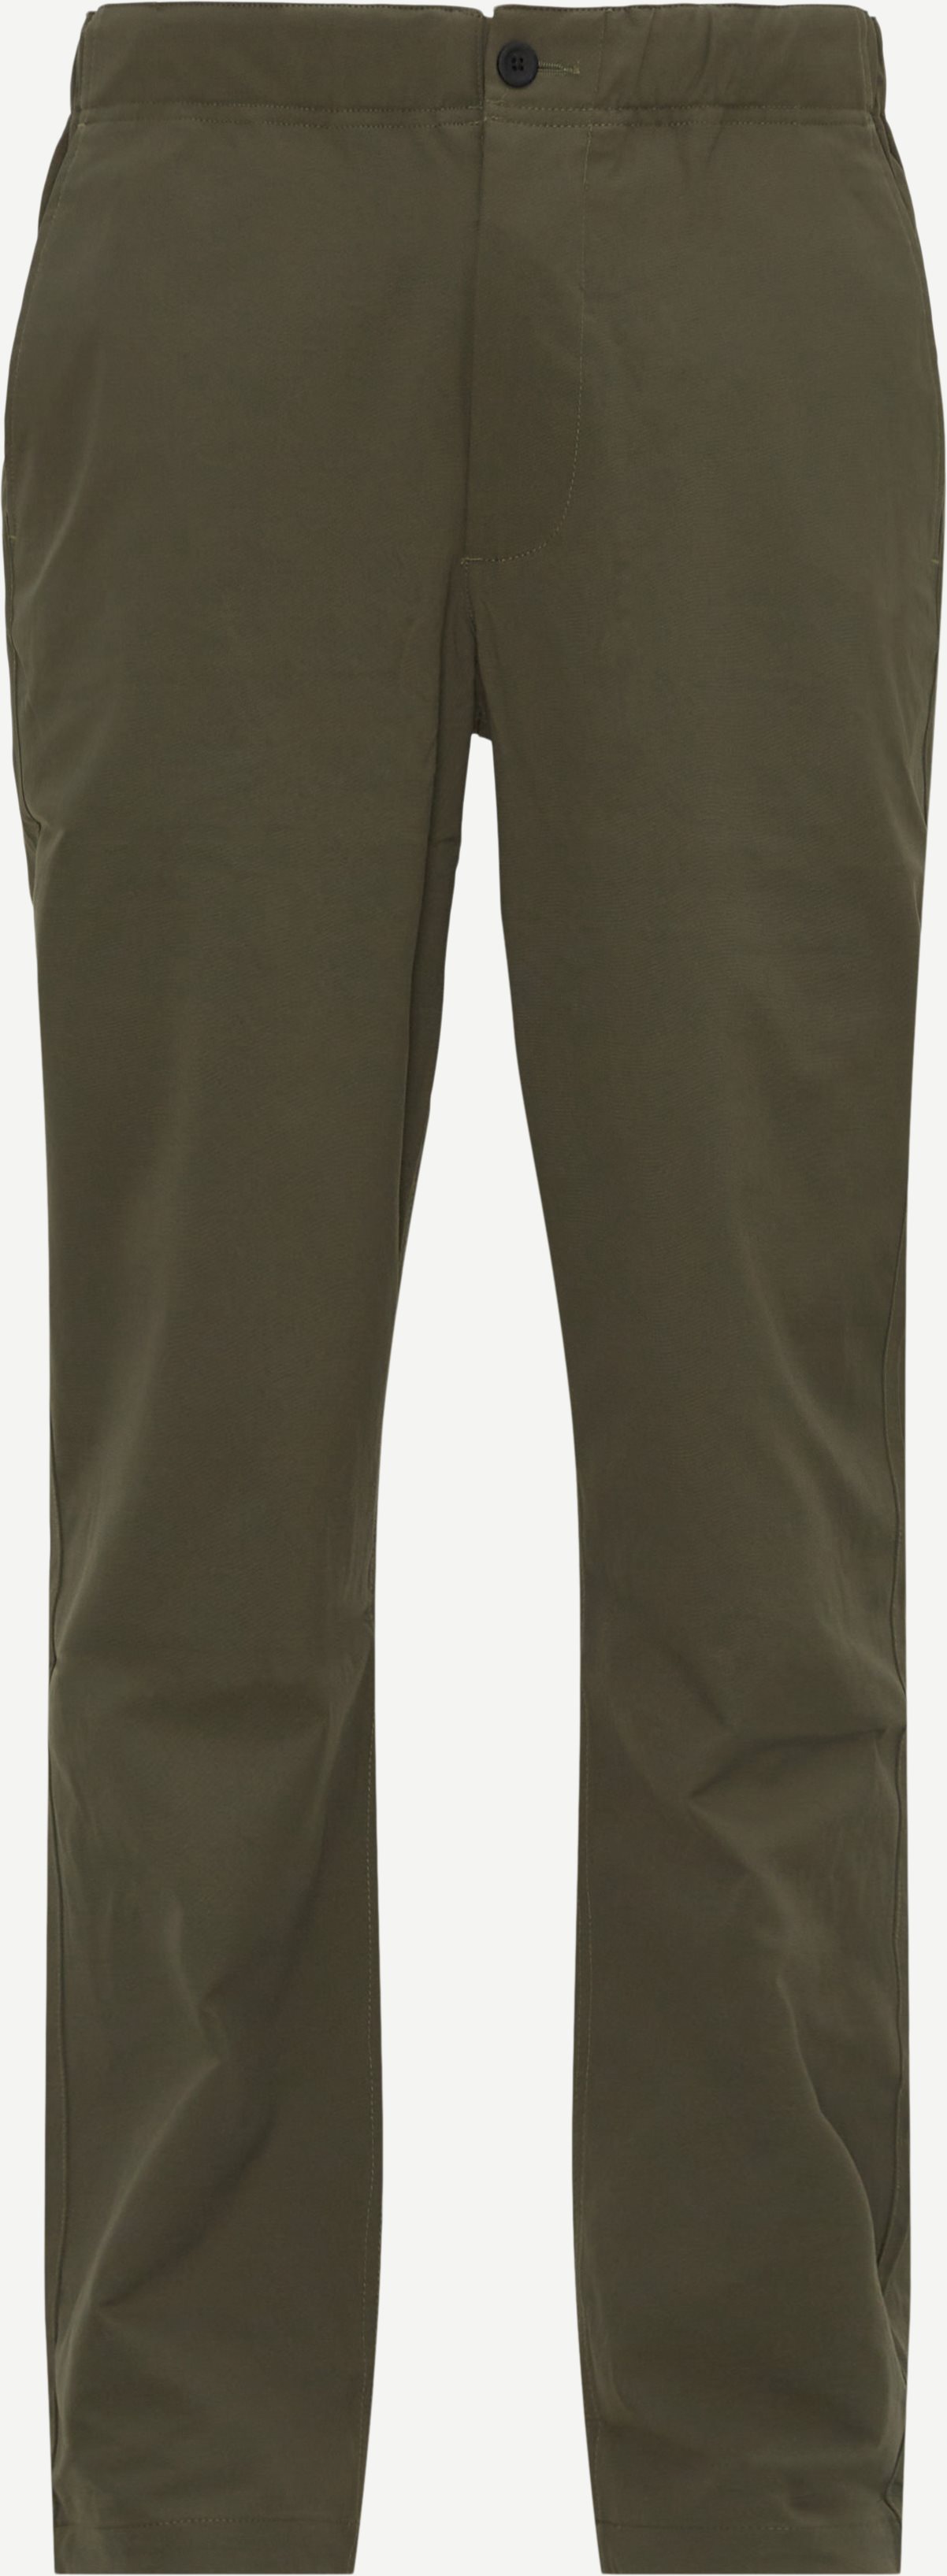 Norse Projects Trousers N25-0383 EZRA RELAXED SOLOTEX TWILL Army